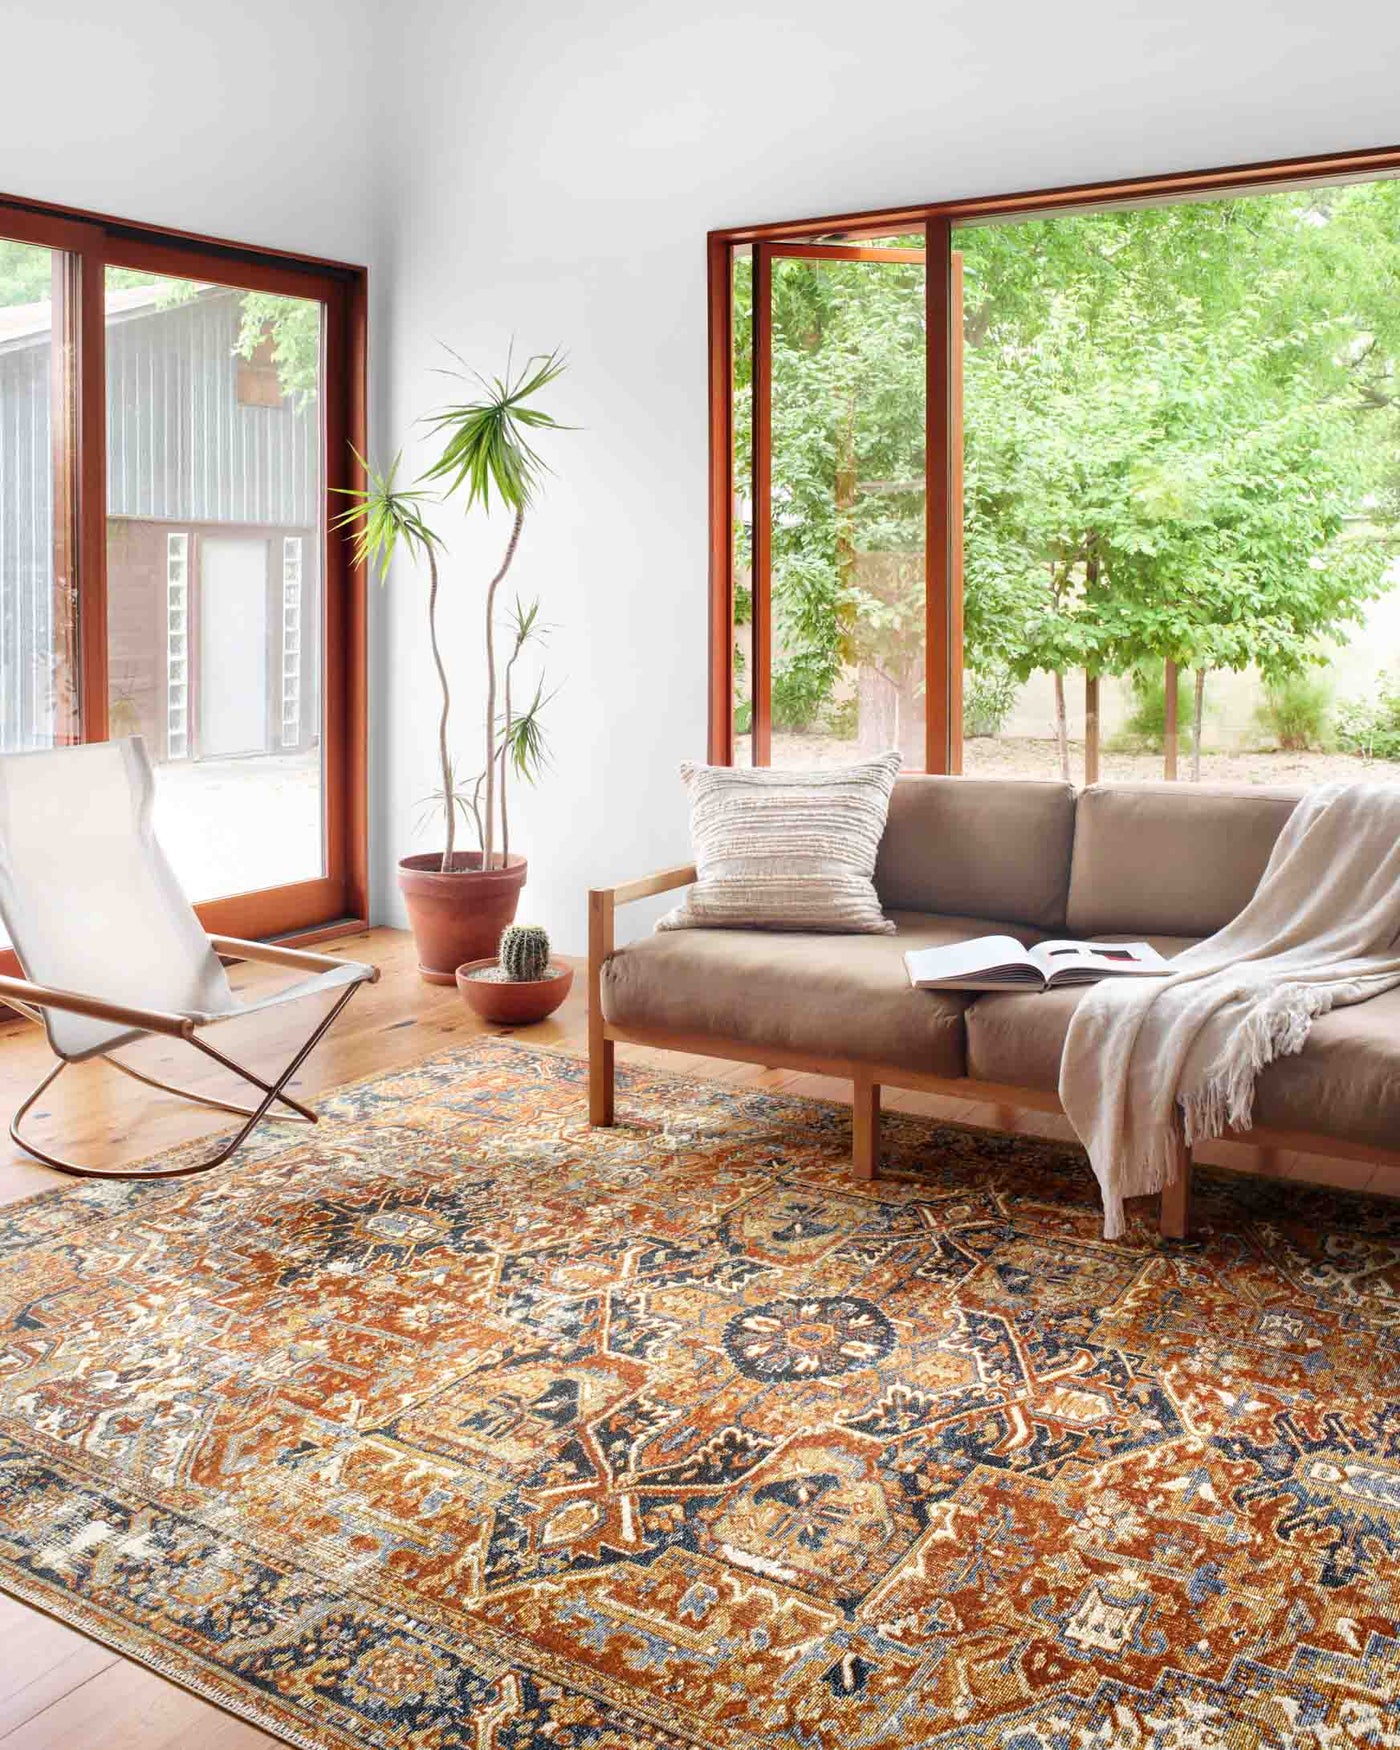 Buy Safavieh Rugs in Canada at Discounted Prices